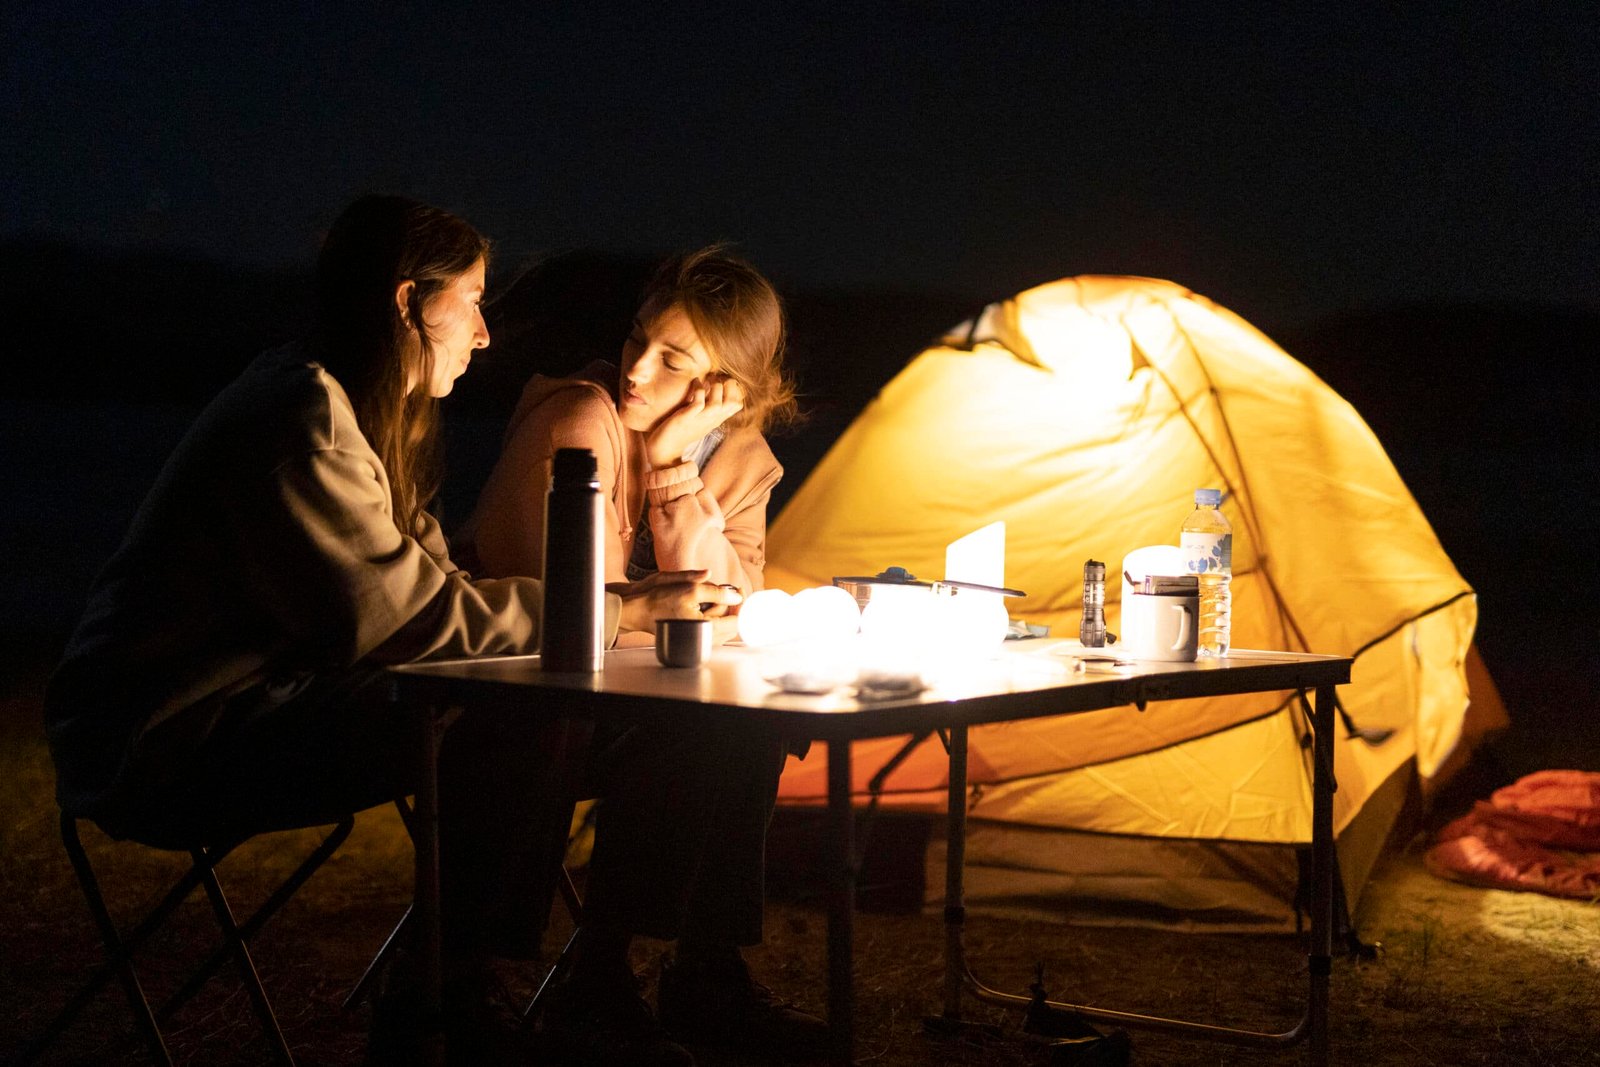 Light Up Your Outdoor Adventures with BioLite’s Innovative Energy Solutions